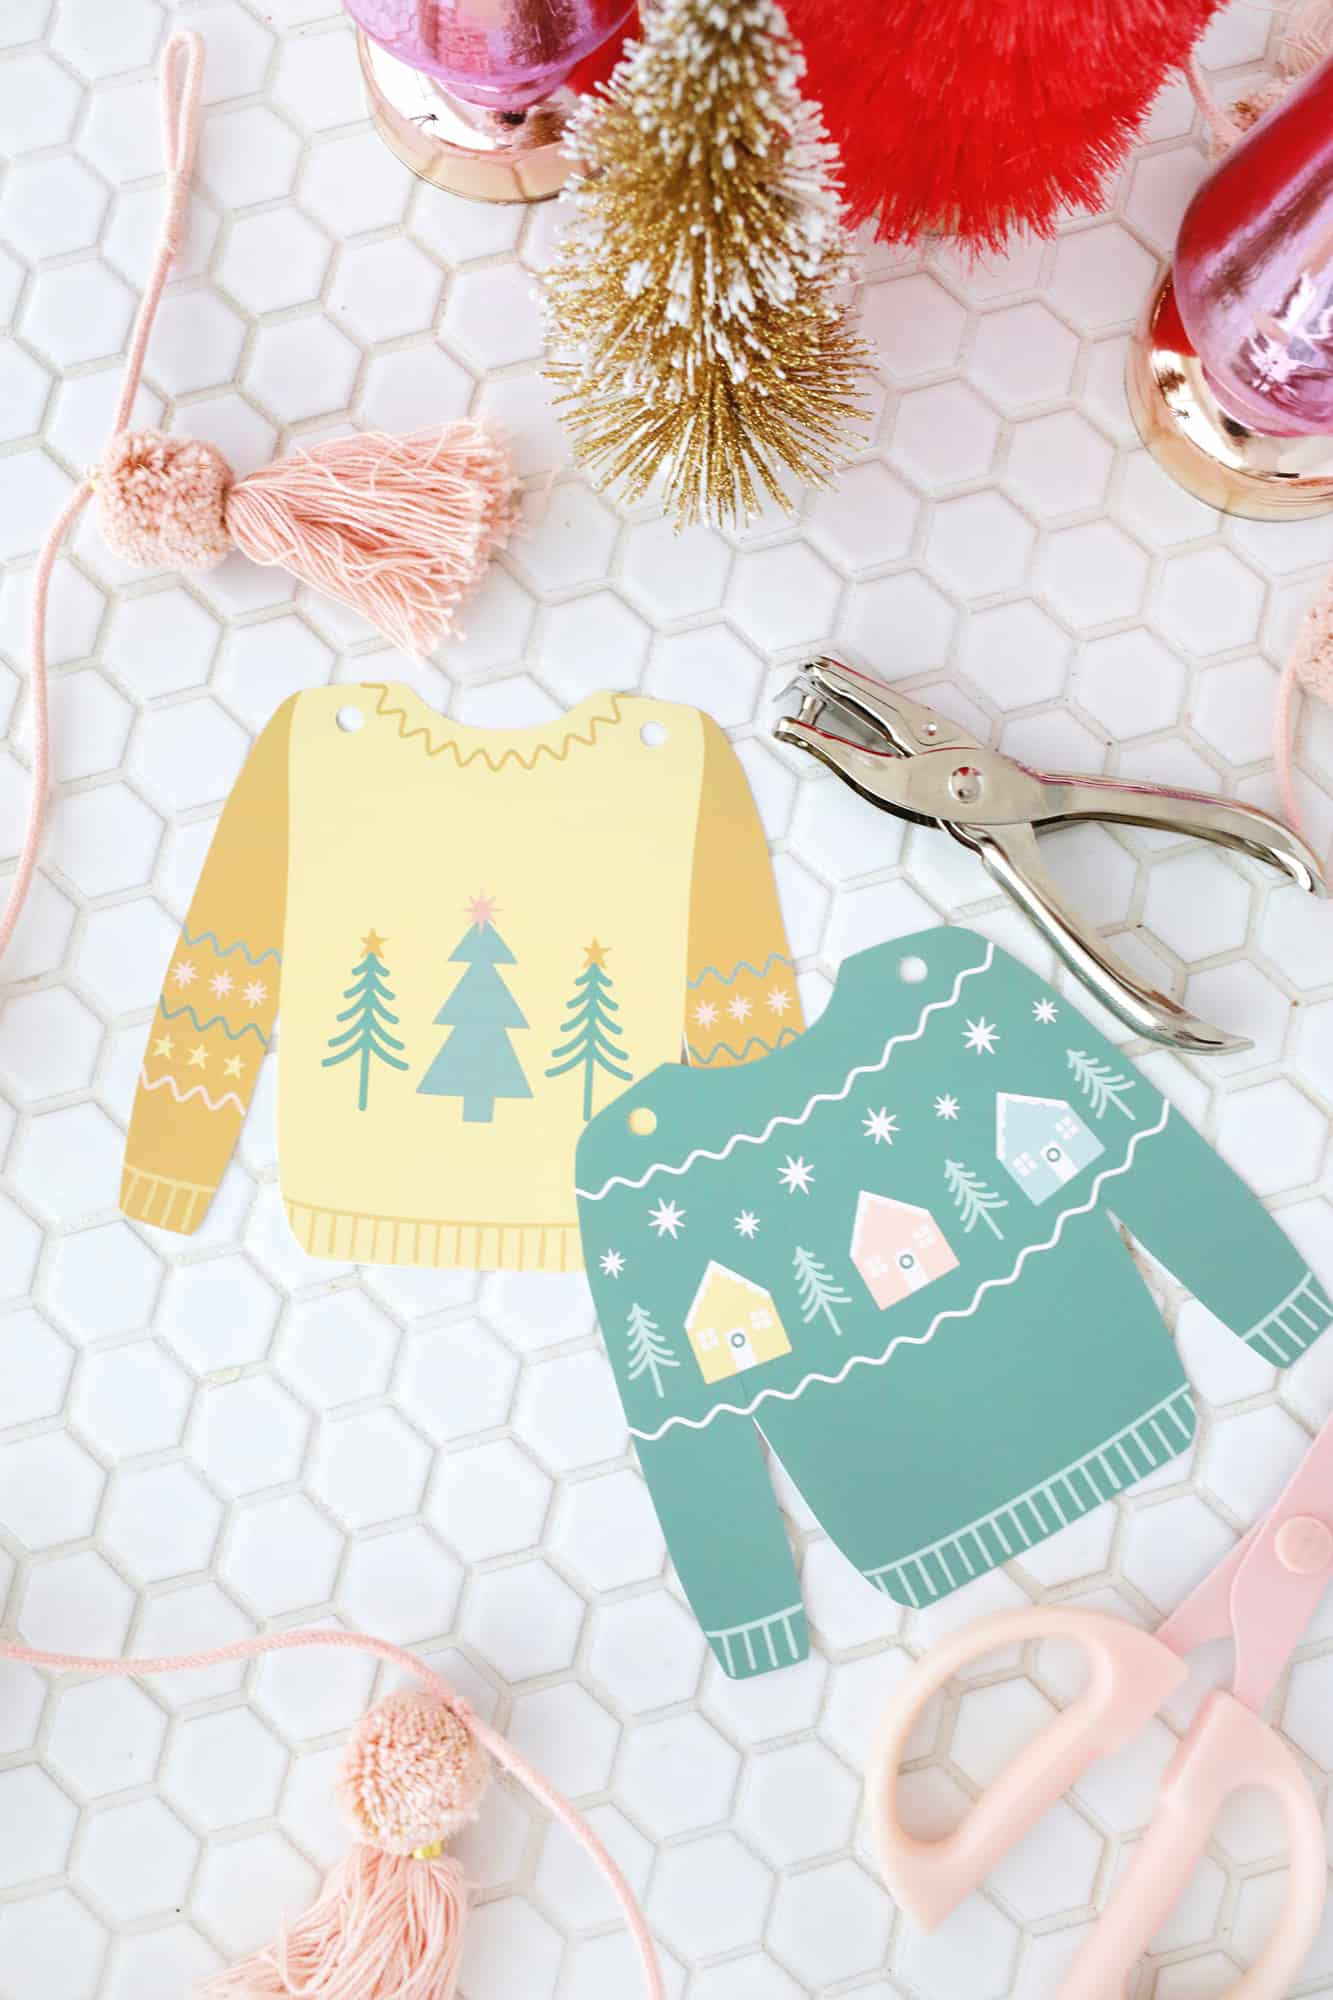 Paper Christmas sweaters punched with a hole punch at the top